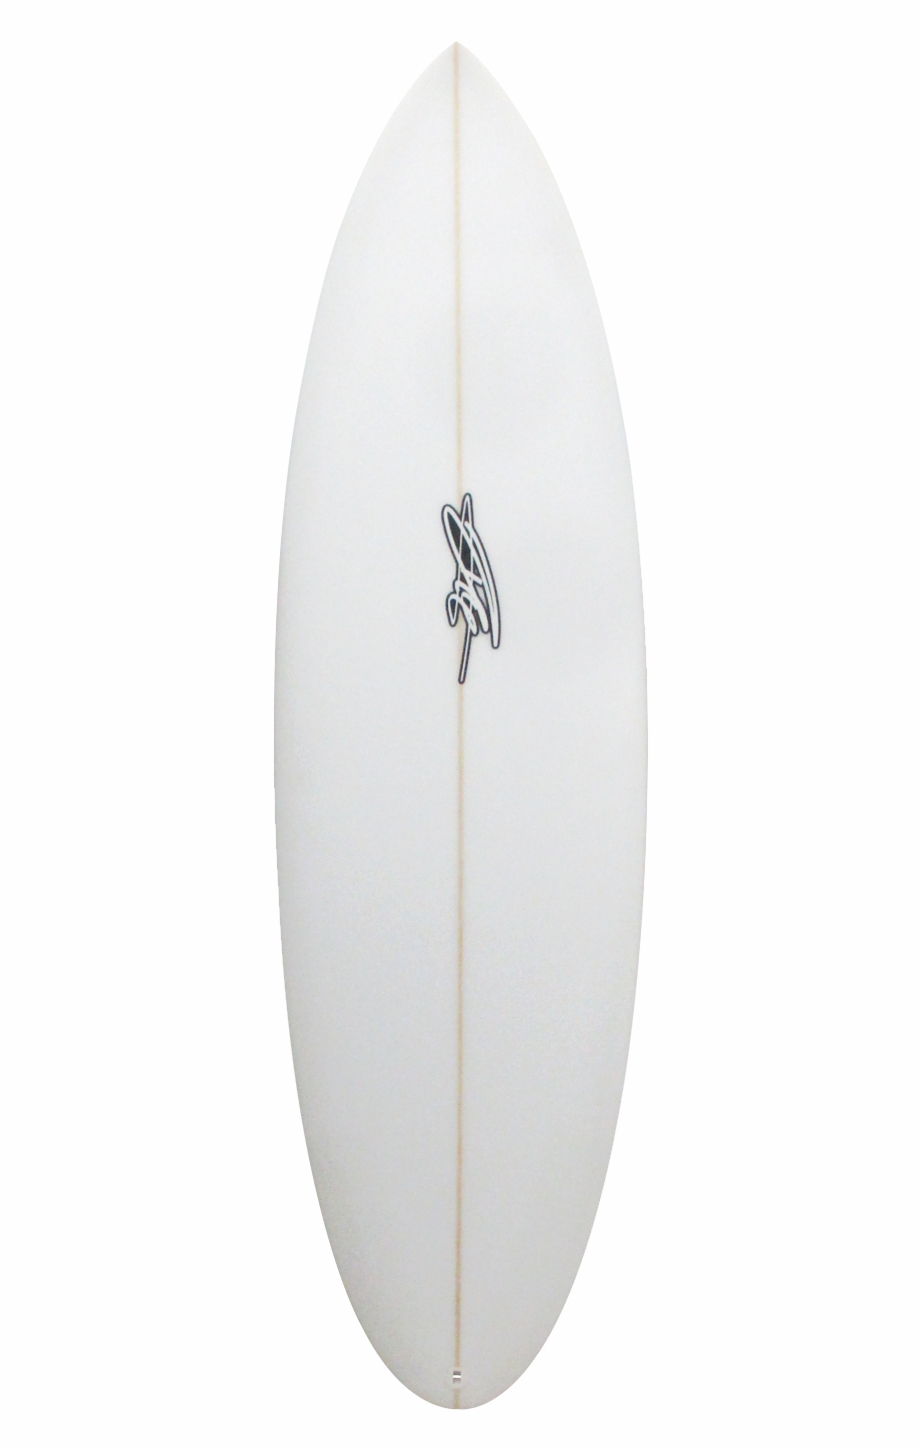 Quick View Surfboard